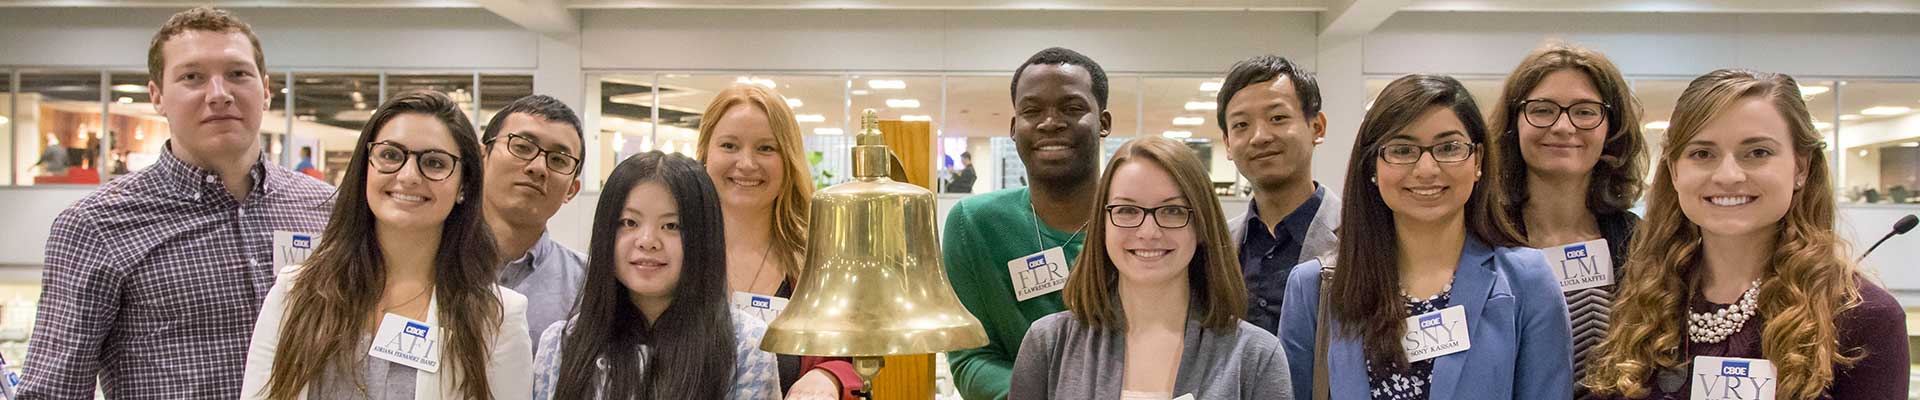 A group of students next to a bell.